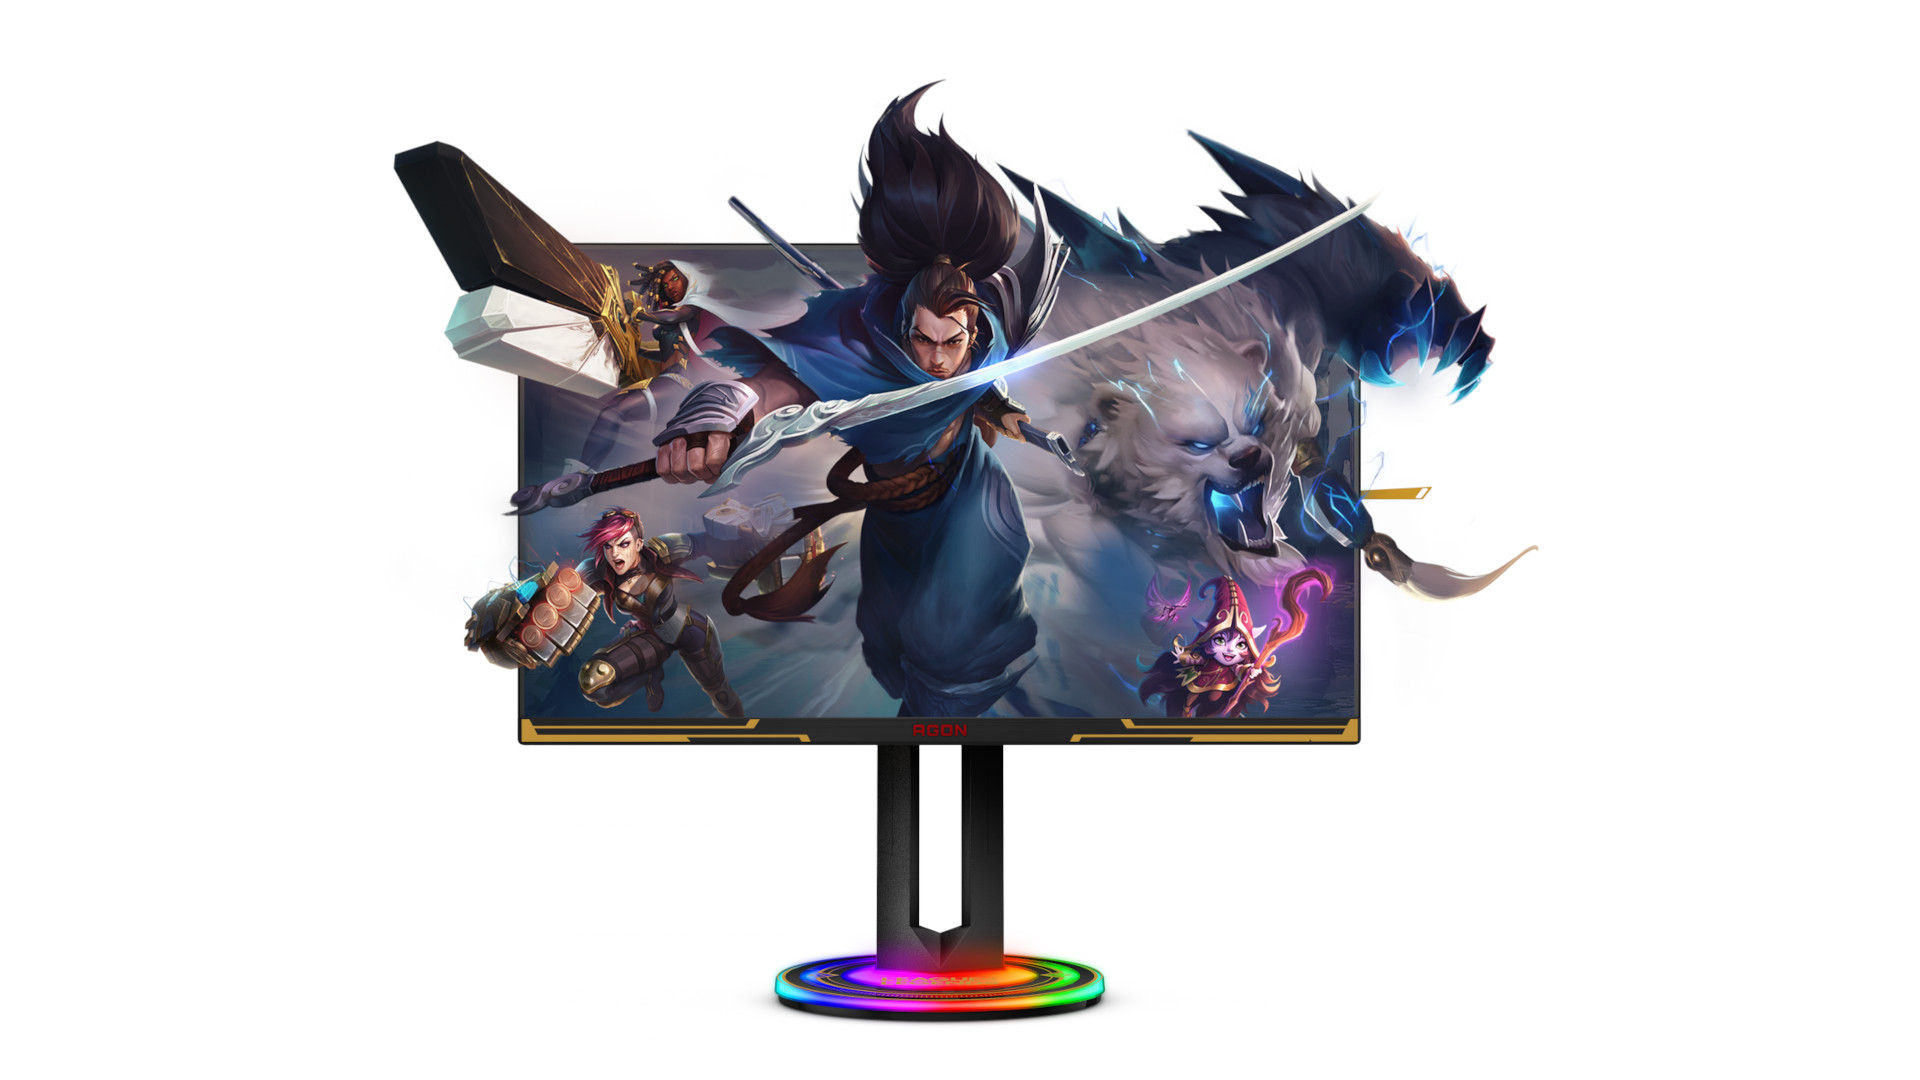 The AOC Agon Pro AG275QXL League of Legends Editiong gaming monitor